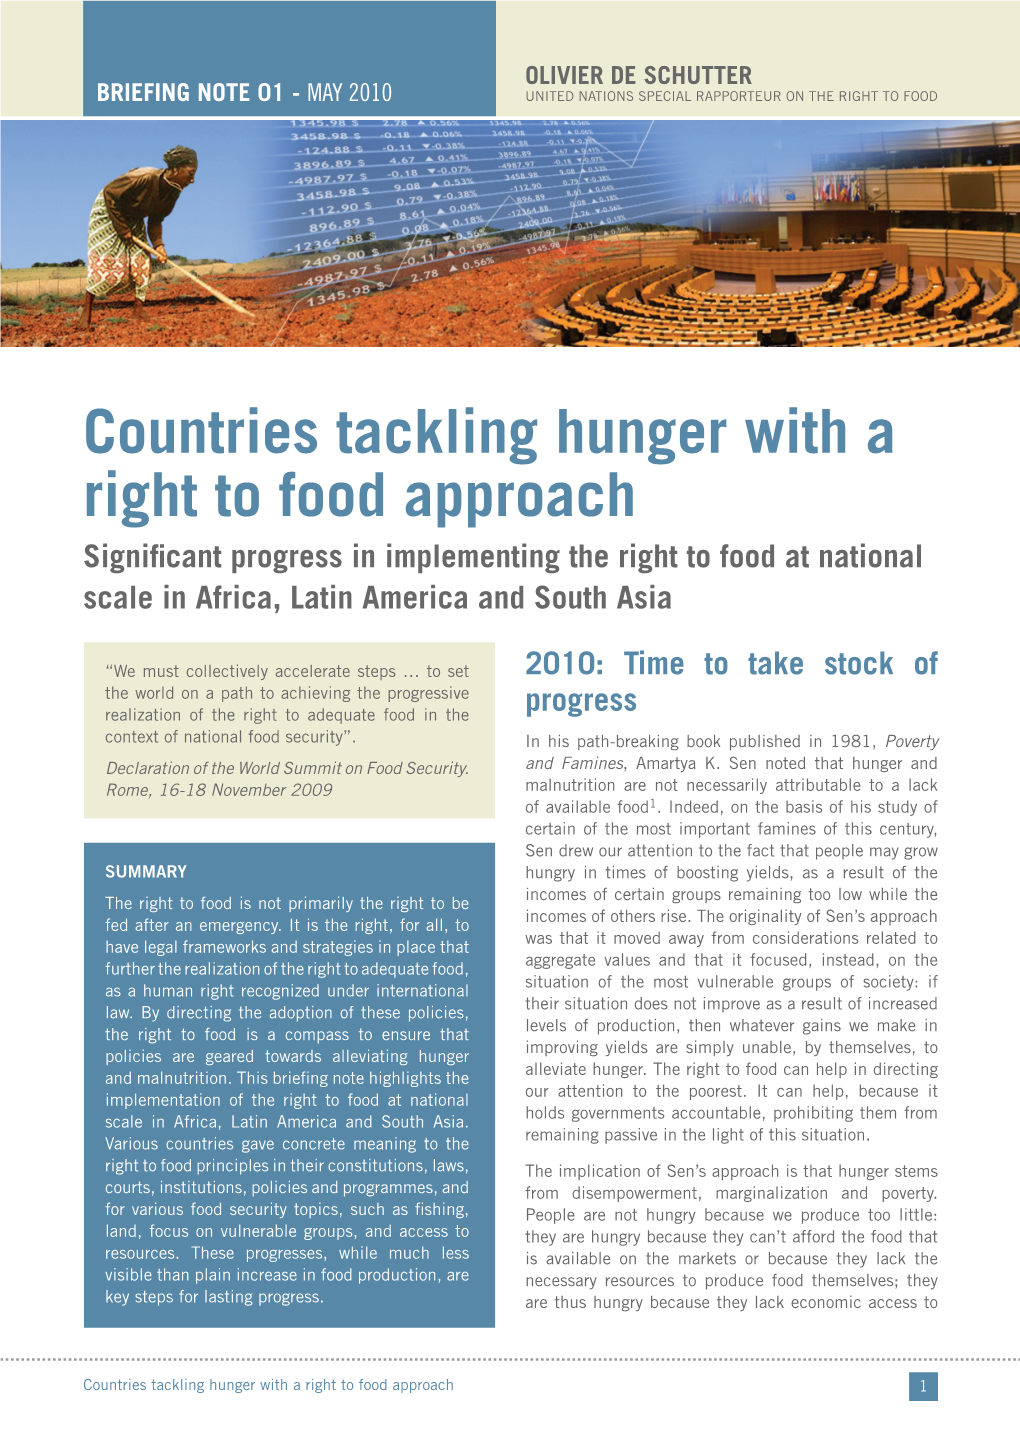 Countries Tackling Hunger with a Right to Food Approach